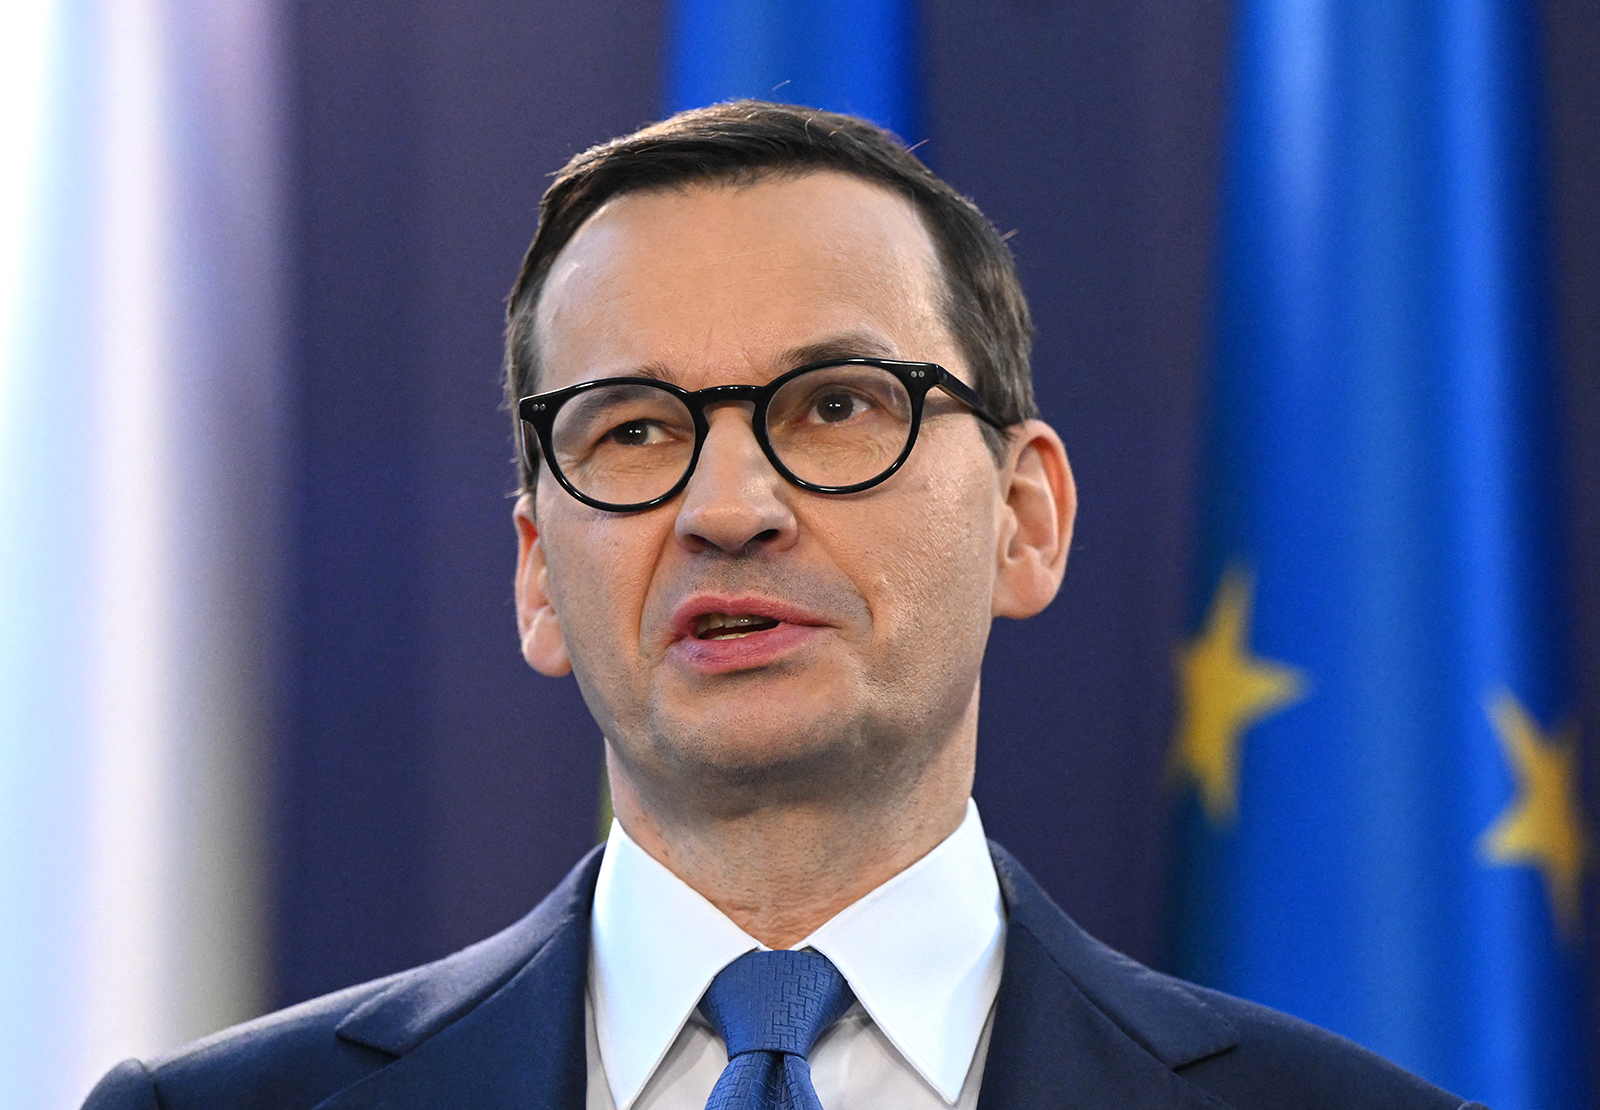 Polish Prime Minister Mateusz Morawiecki speaks at a press conference in Bucharest, Romania, on March 28. 